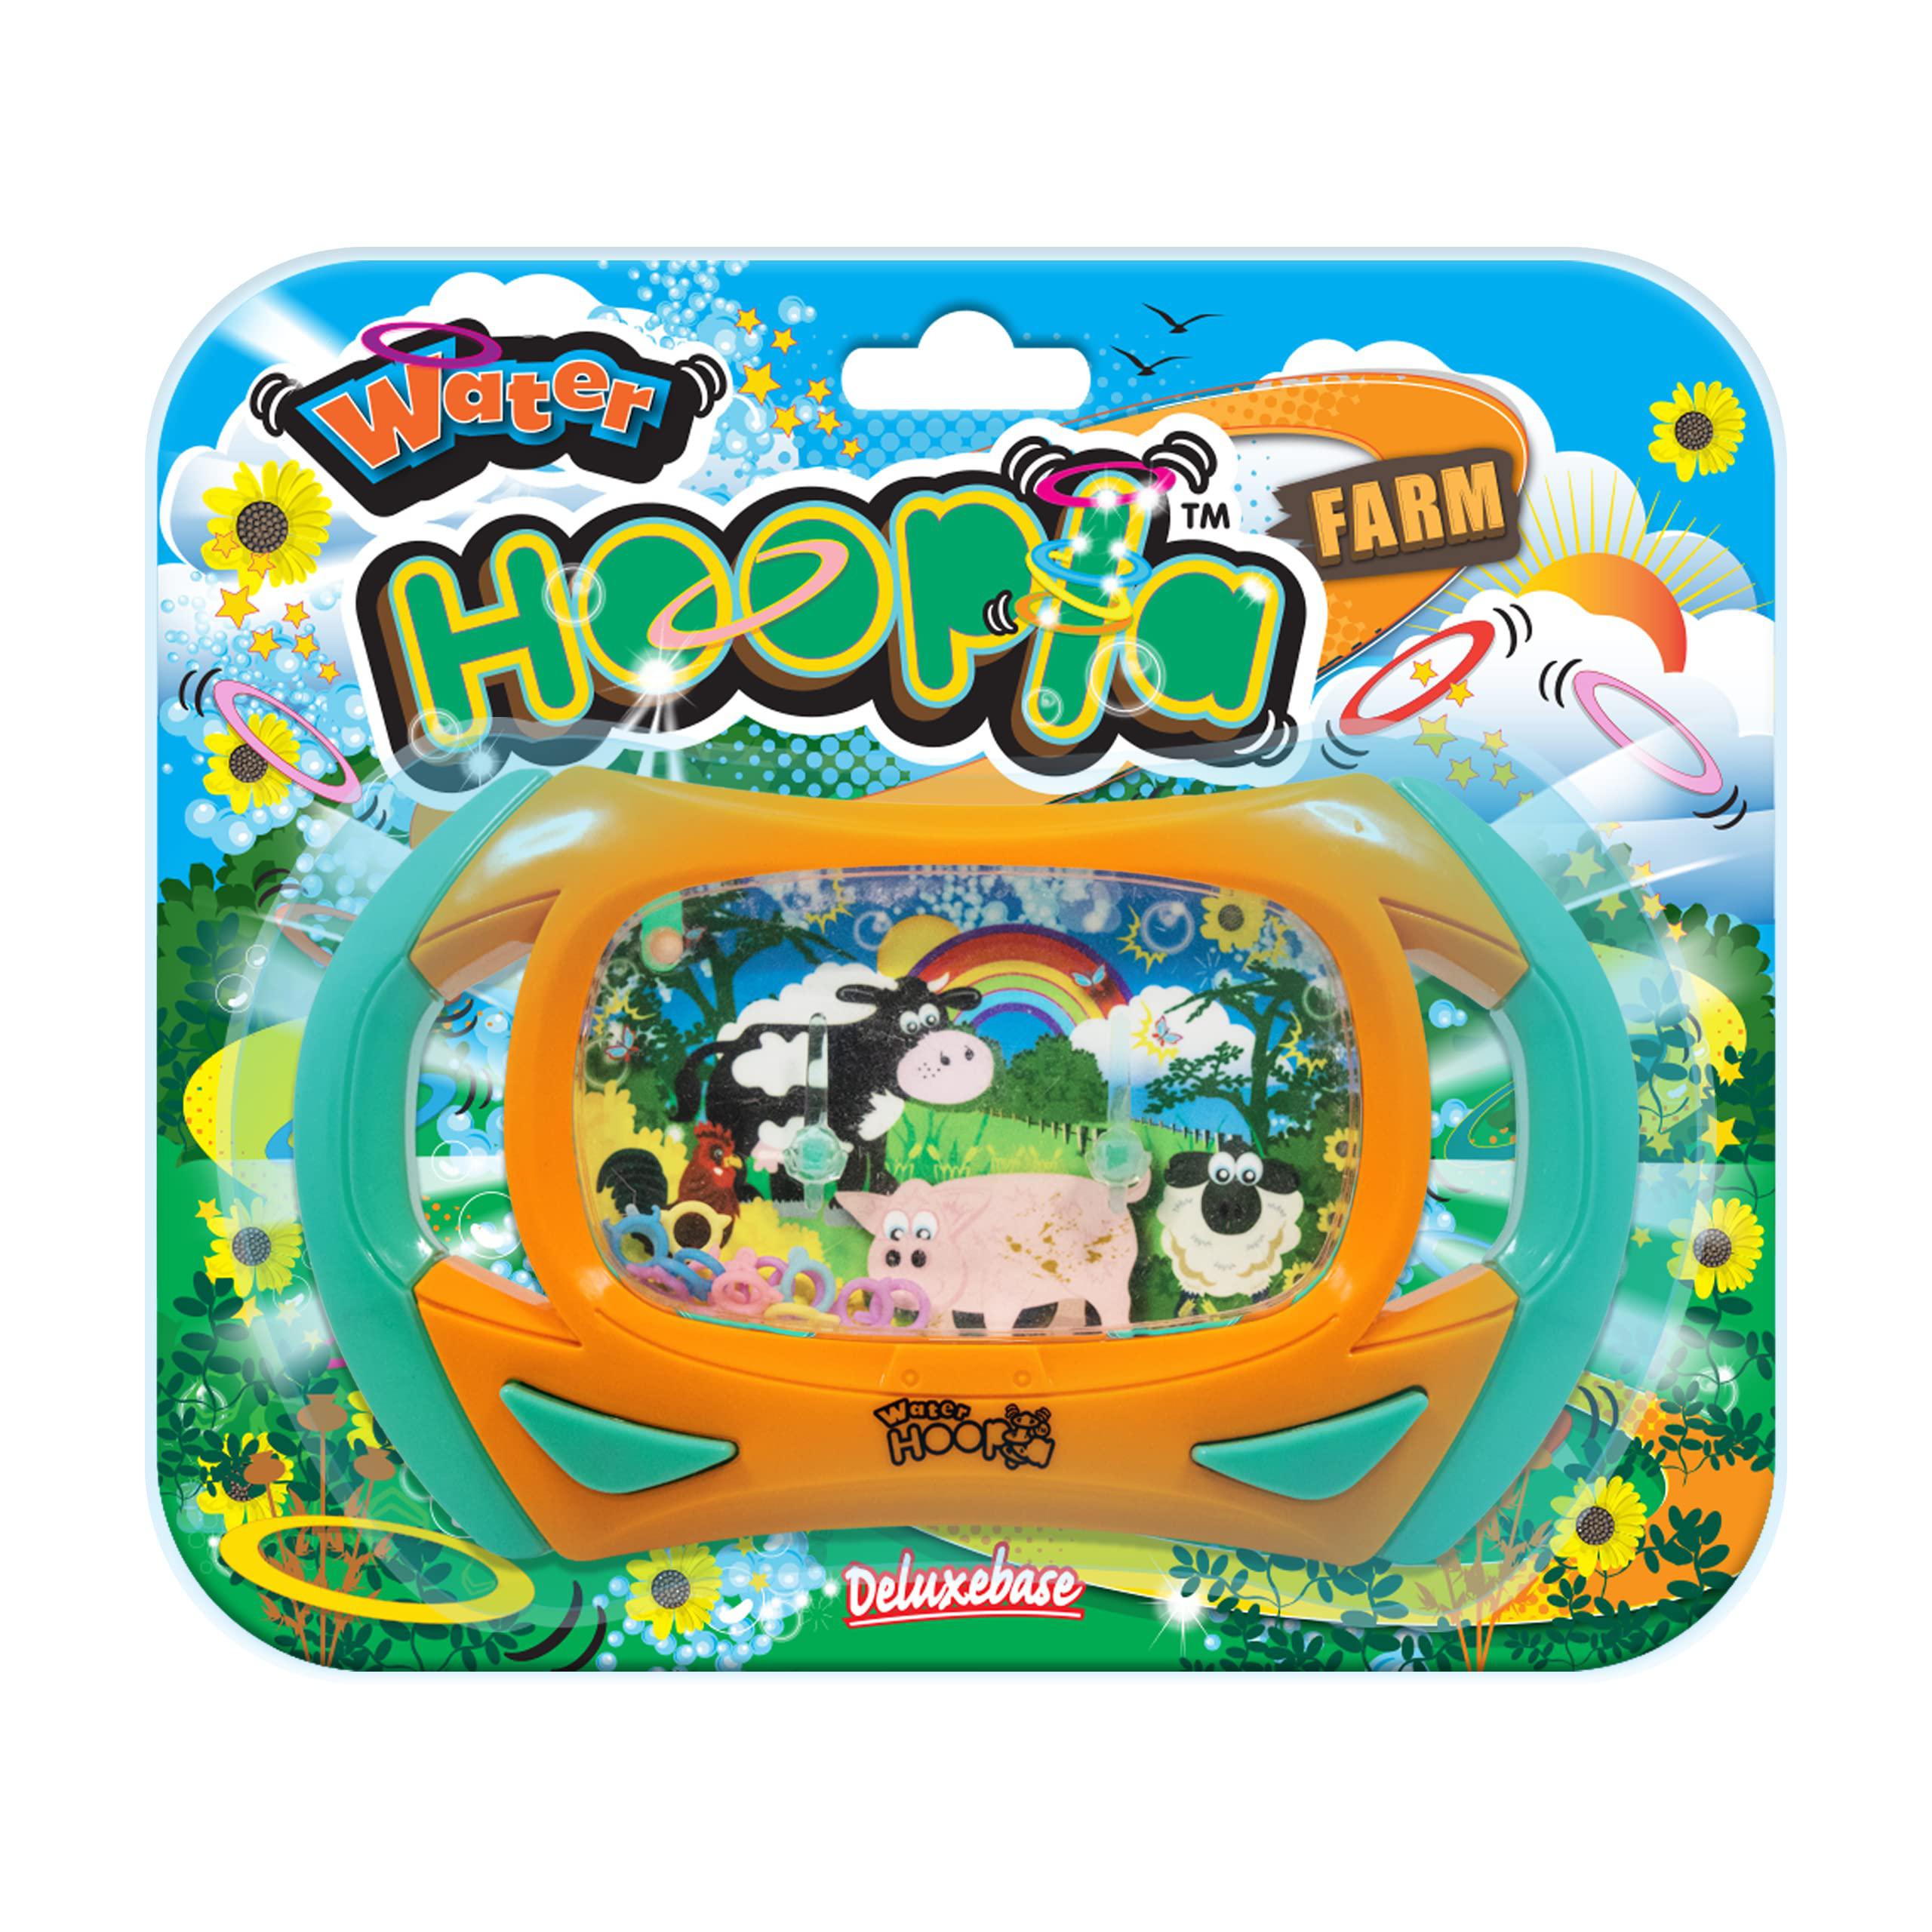 water hoopla - farm from deluxebase. farmyard animal retro water handheld game. ring toss hand held arcade game for kids and 